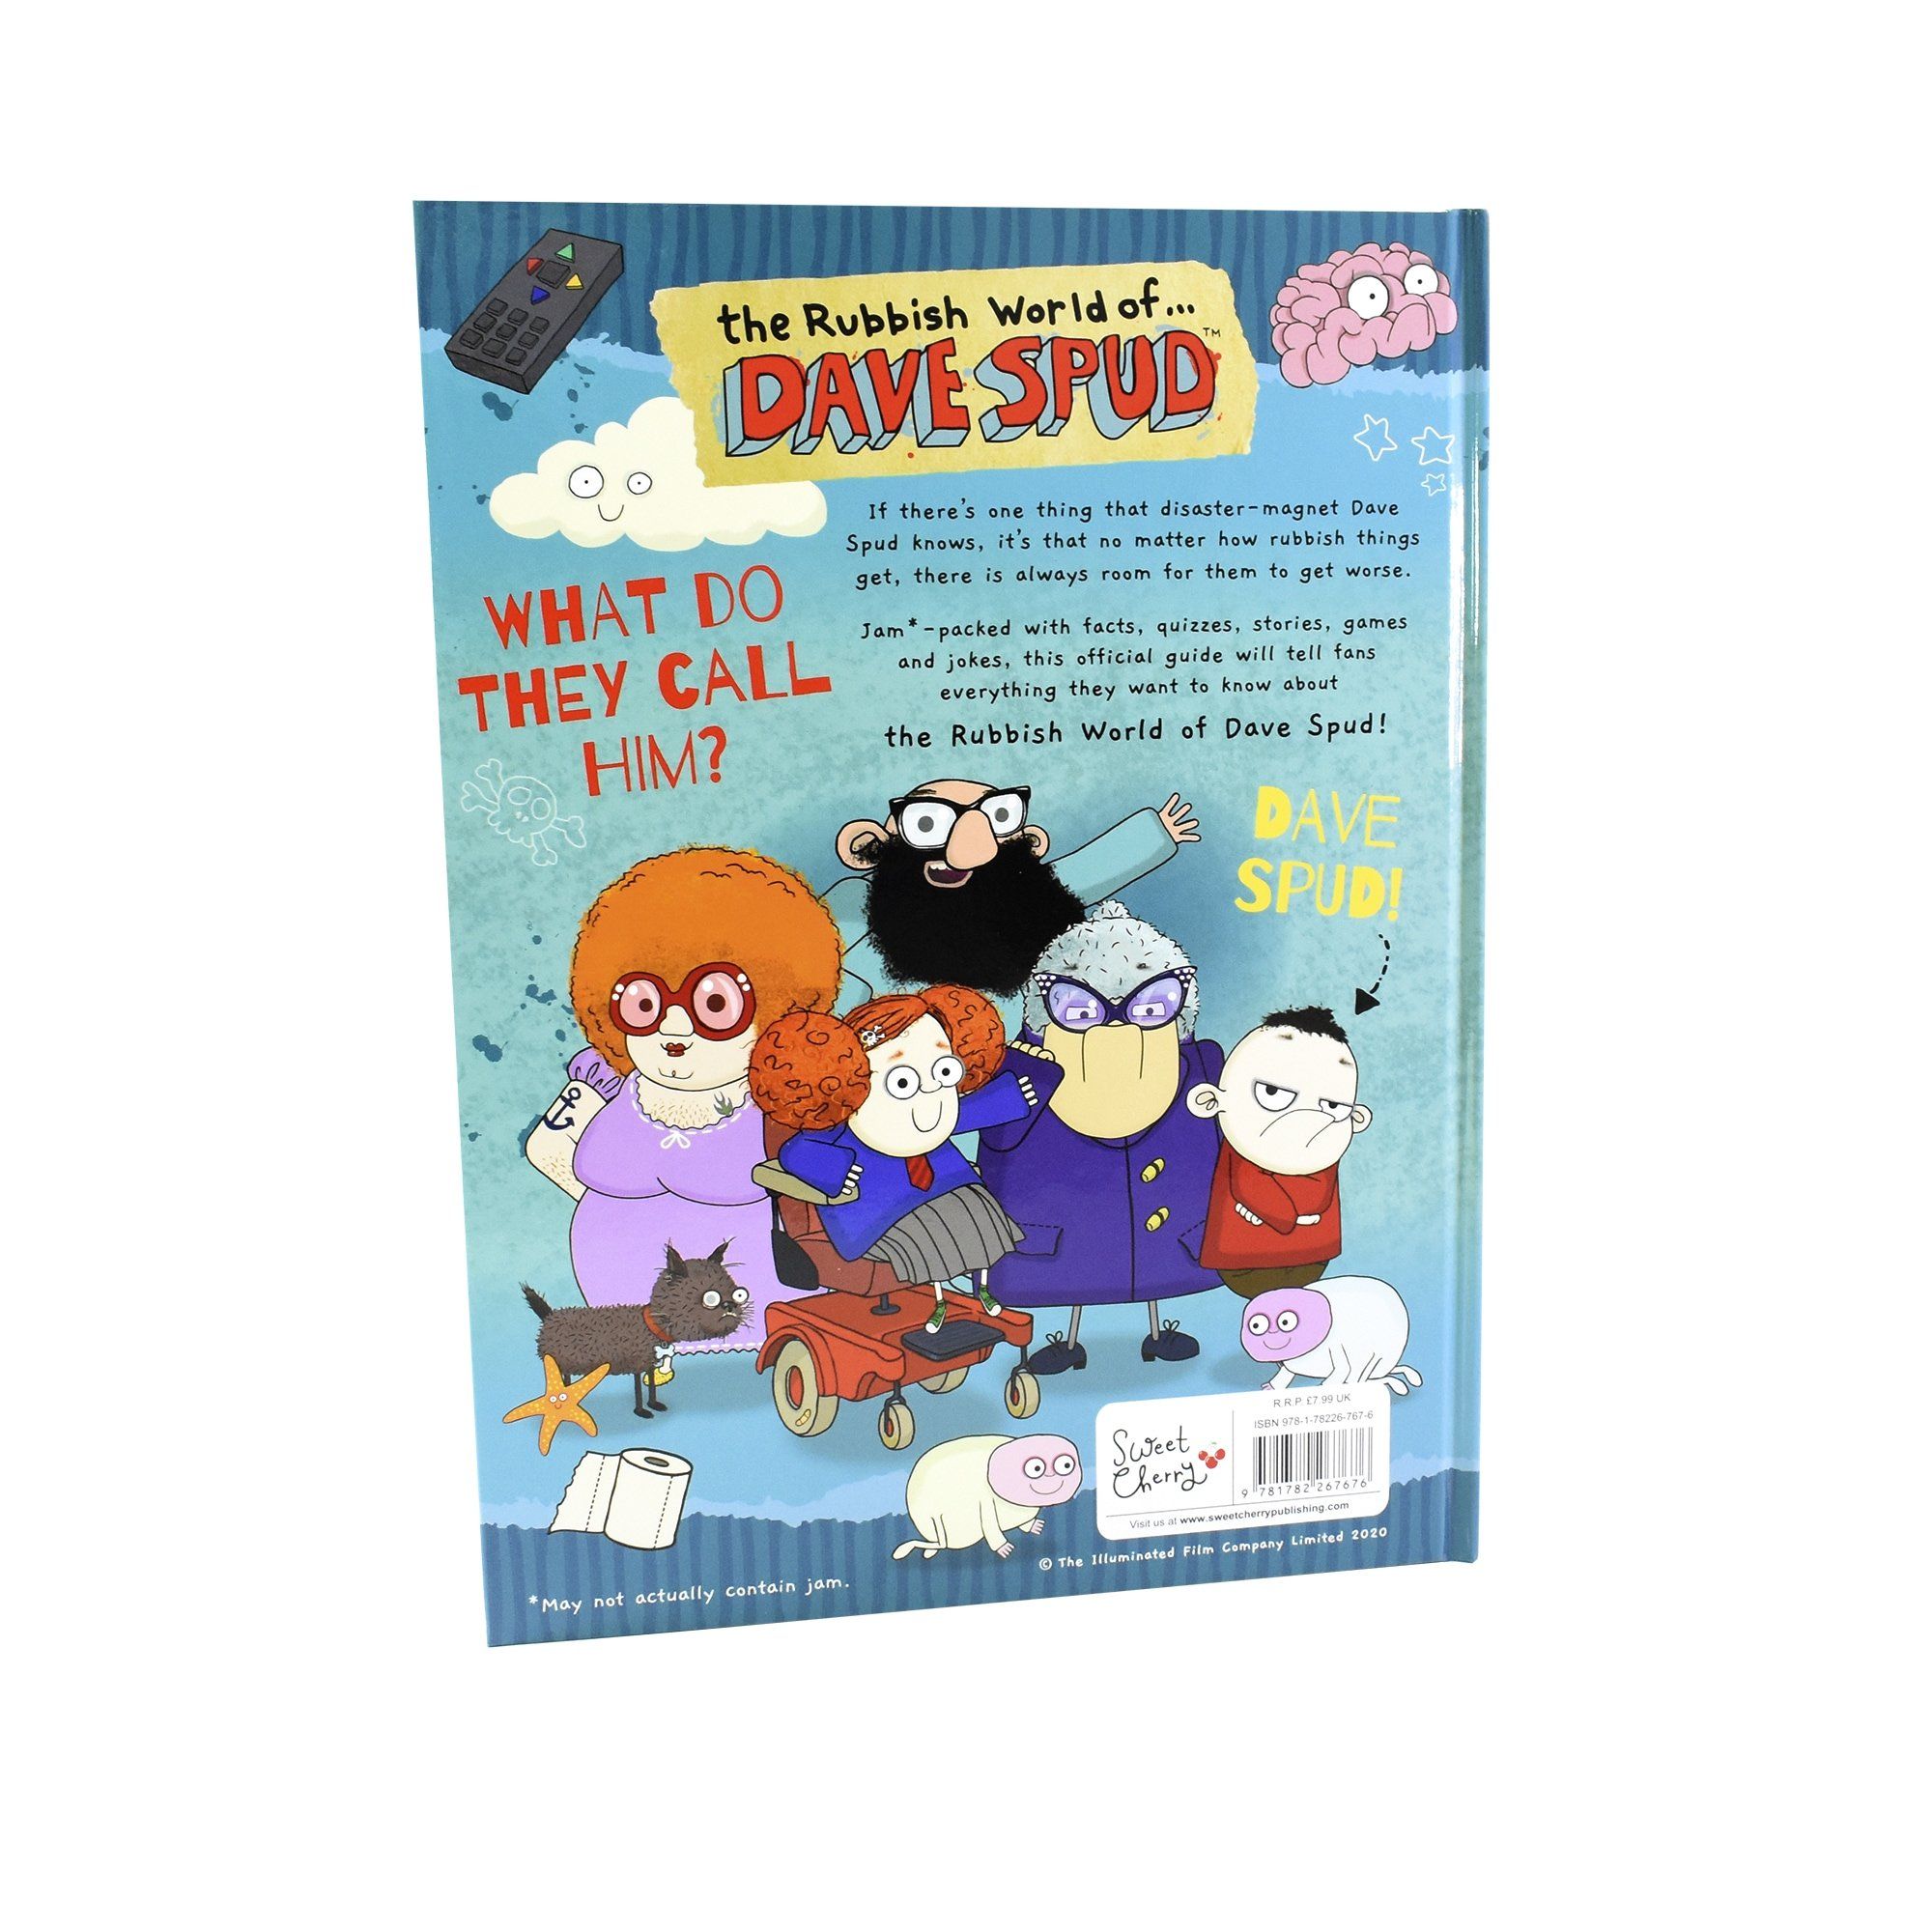 The Rubbish World of.... Dave Spud Official Guide By Sweet Cherry Publishing - Ages 7-9 - Hardback